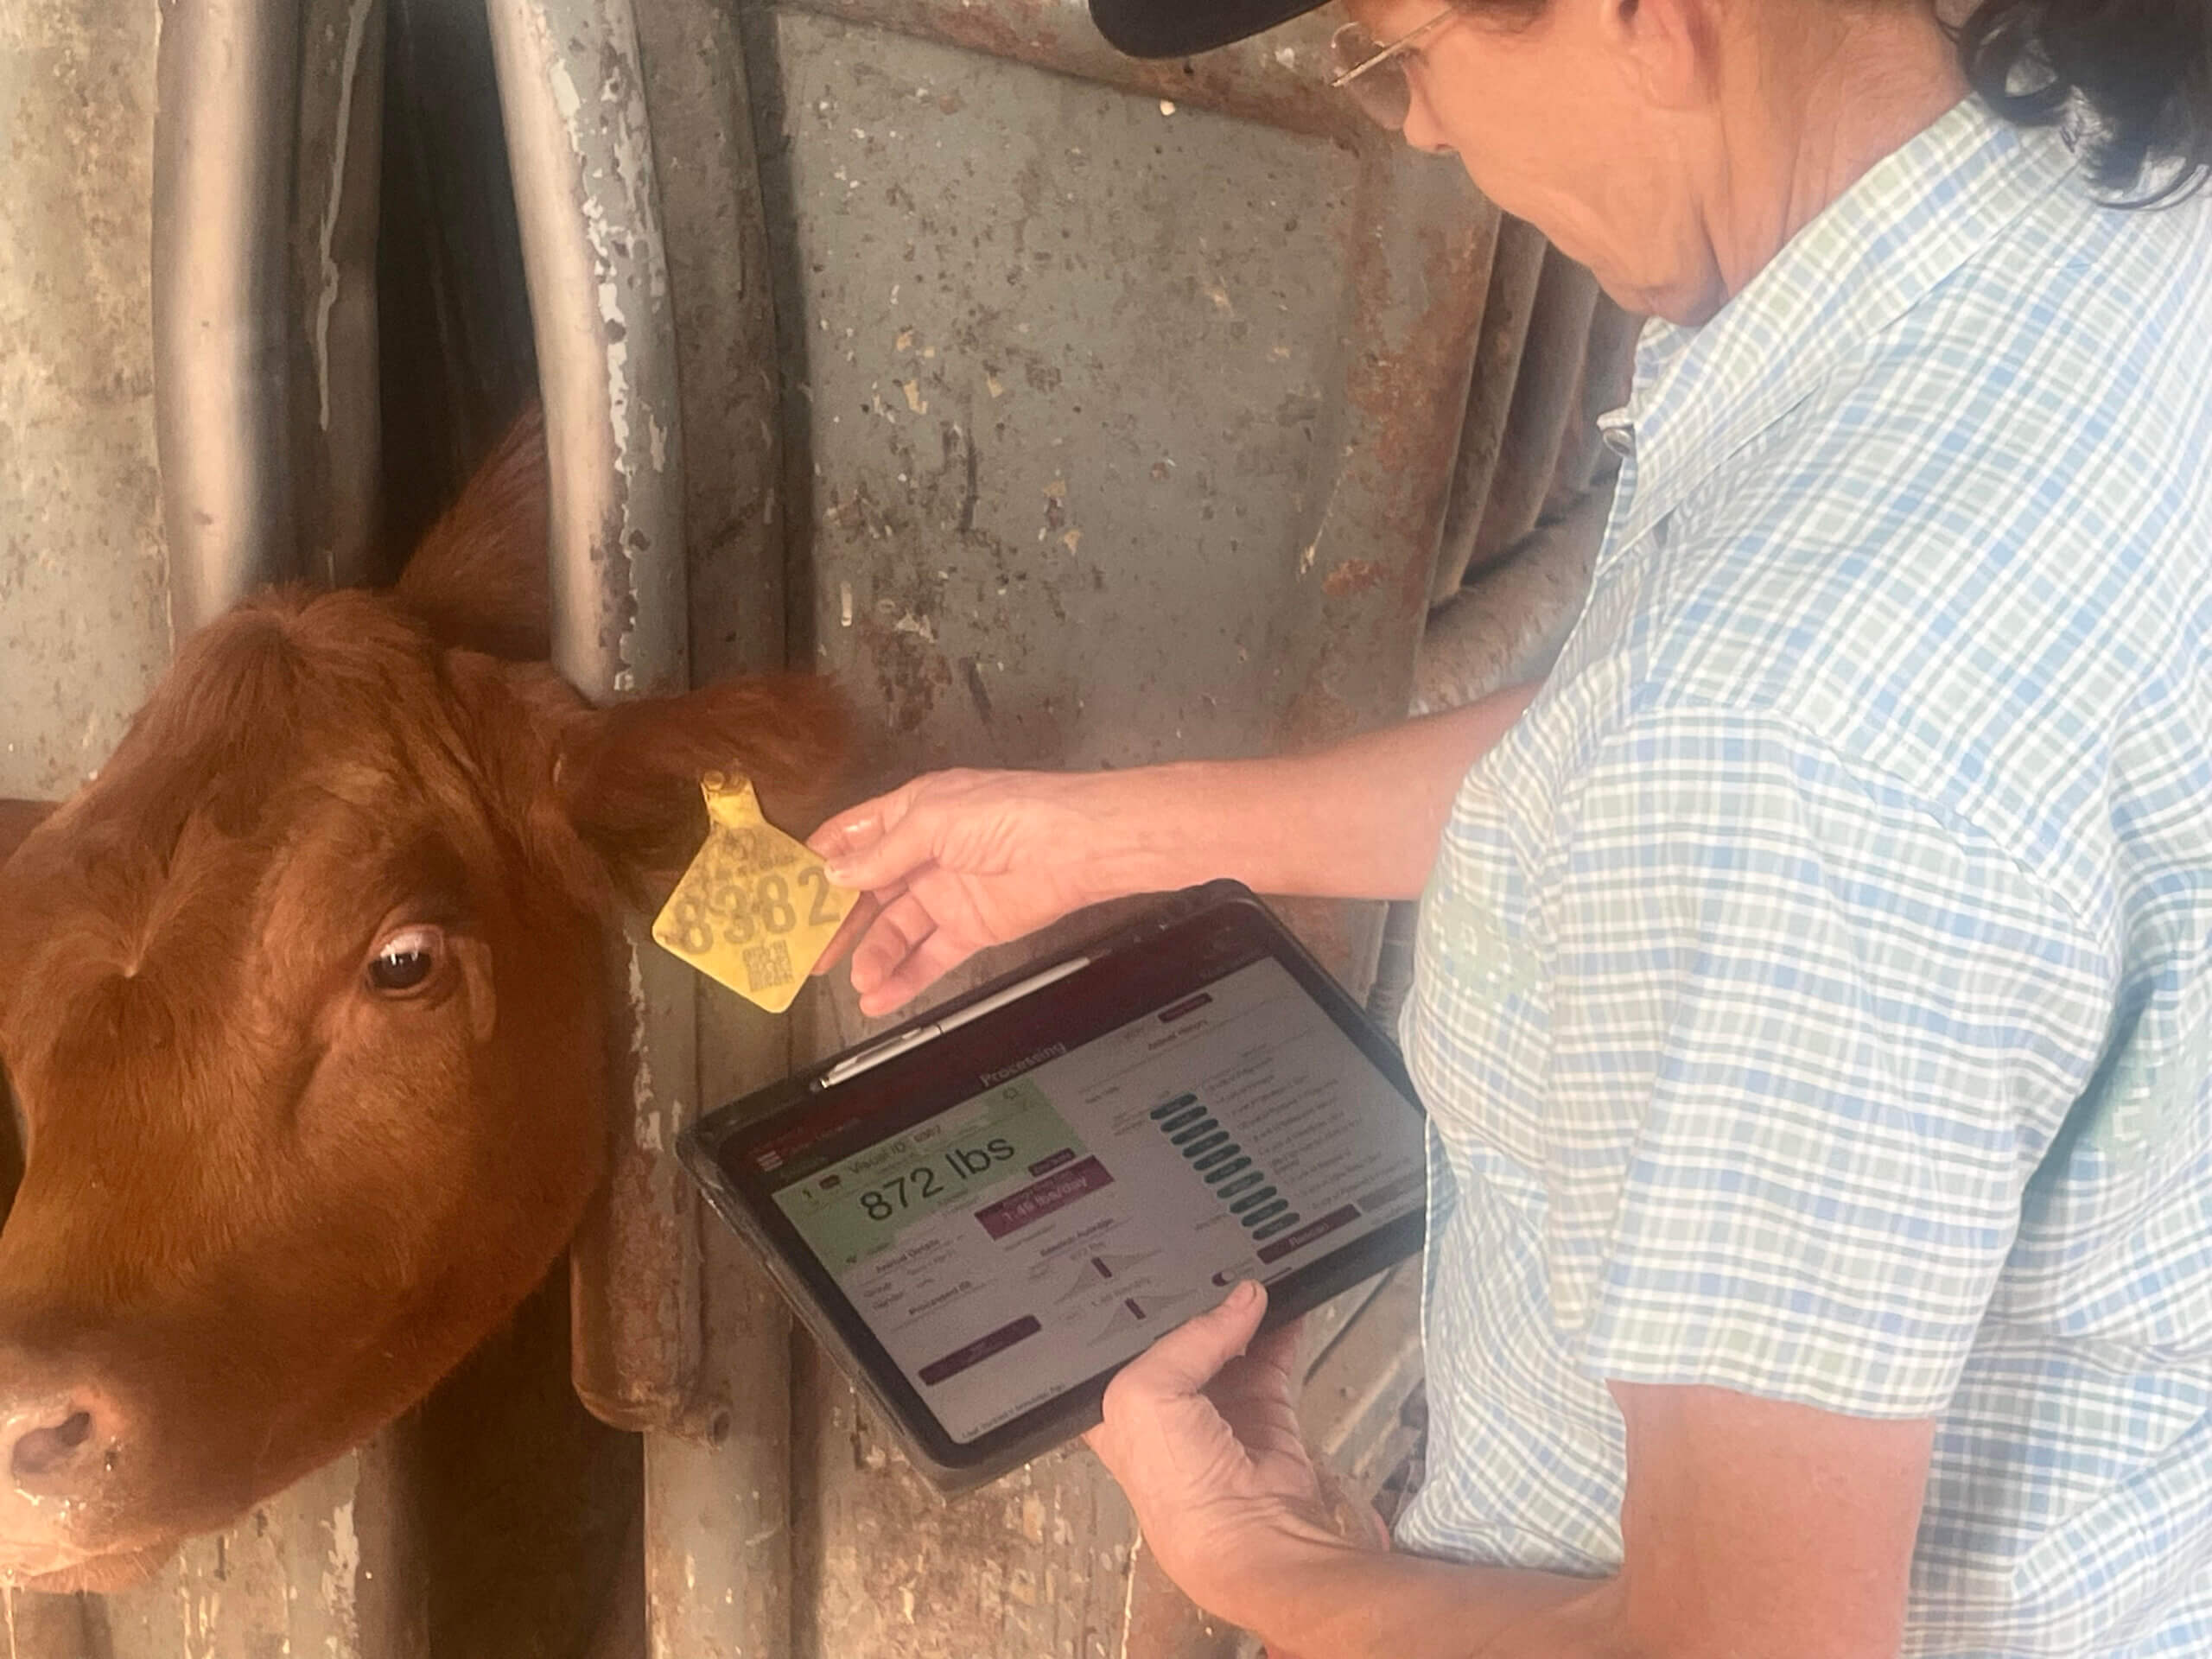 Margie Carter comparing EID tags with the automated syc on the Performance Beef iPad.